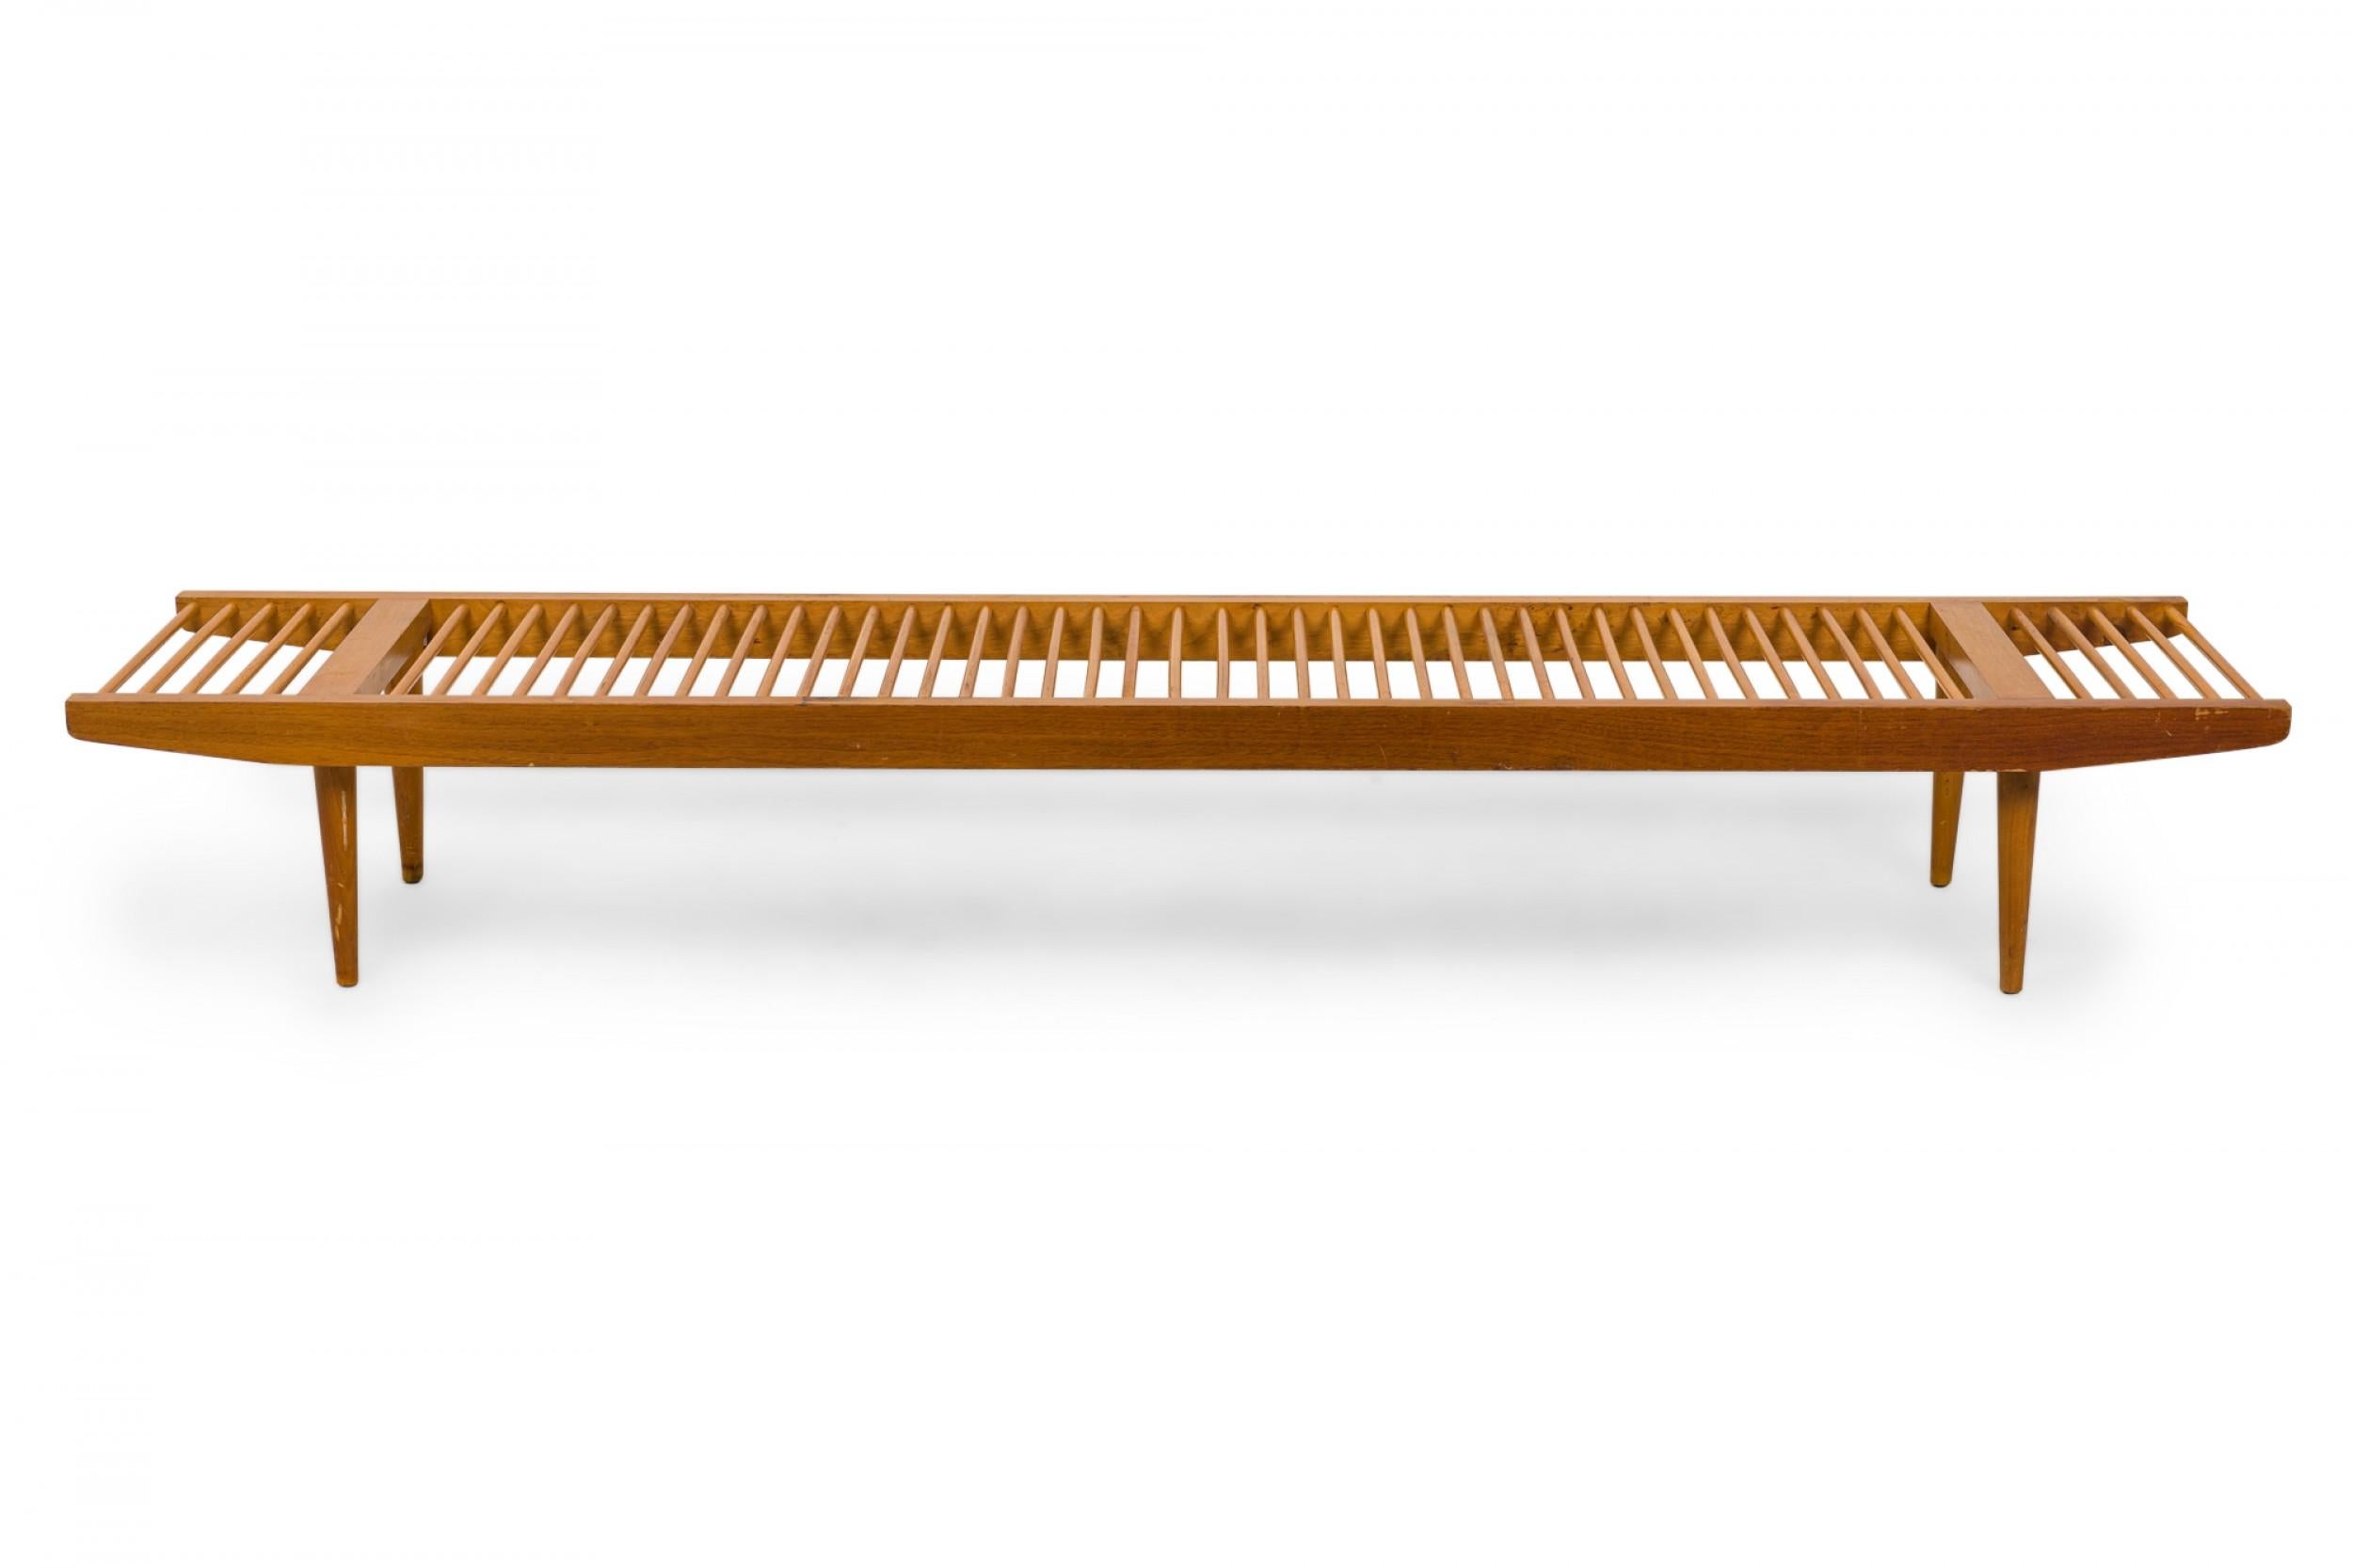 American Mid-Century rectangular 'dowel' bench with a light wood frame and a seat made of dowel slats. (MILO BAUGHMAN FOR GLENN OF CALIFORNIA)(Similar bench: DF0640)
